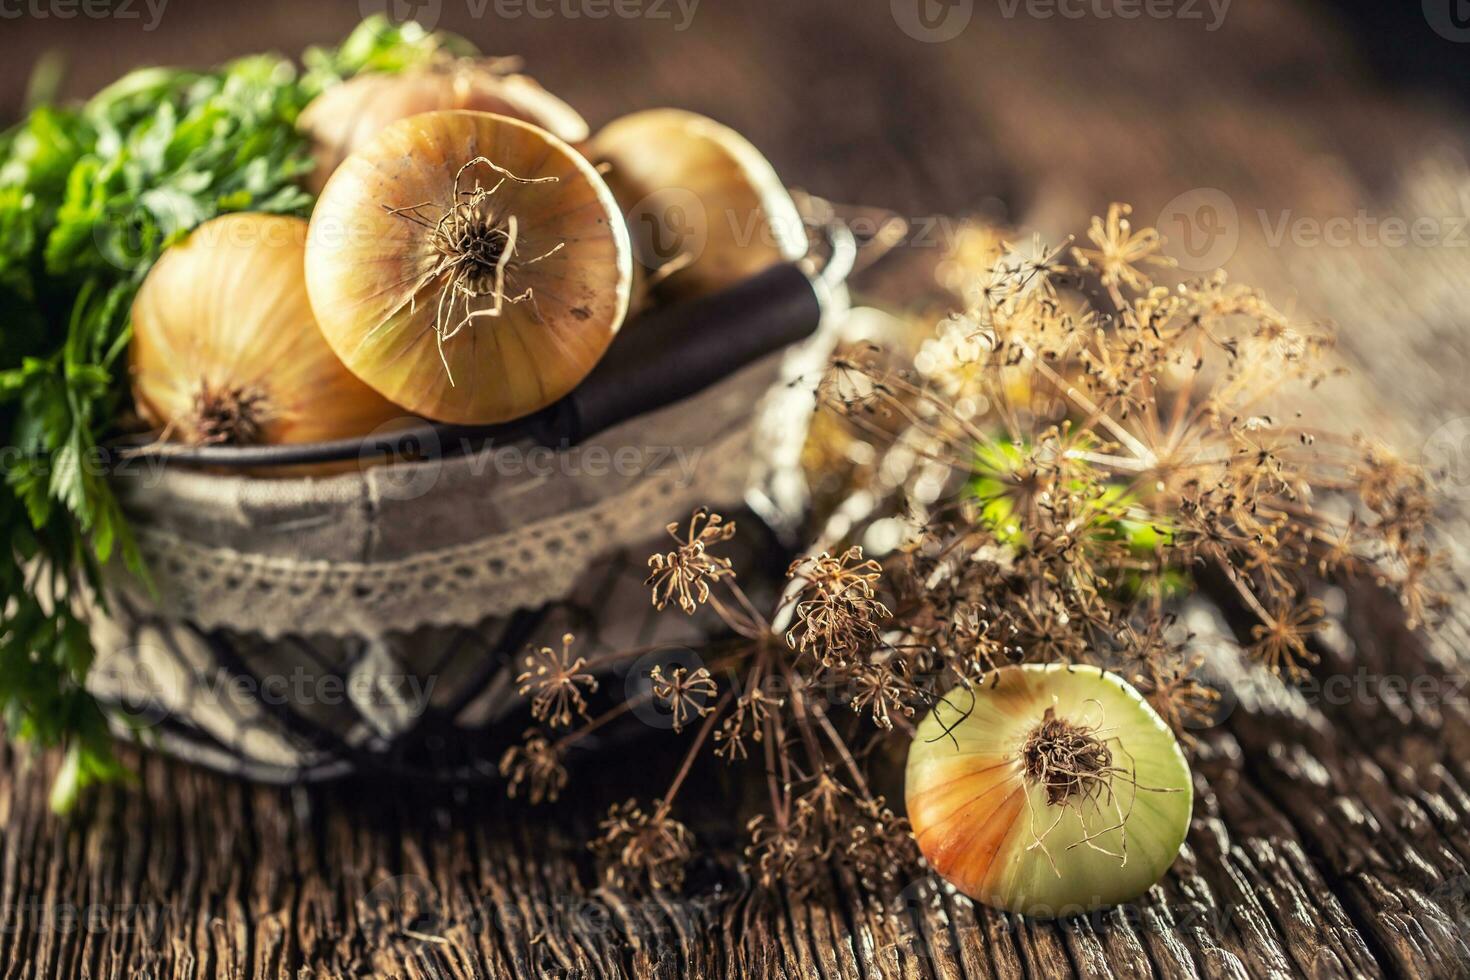 Bundle of freely lying dried onion with parsley herbs and dill in basket on a wooden table photo